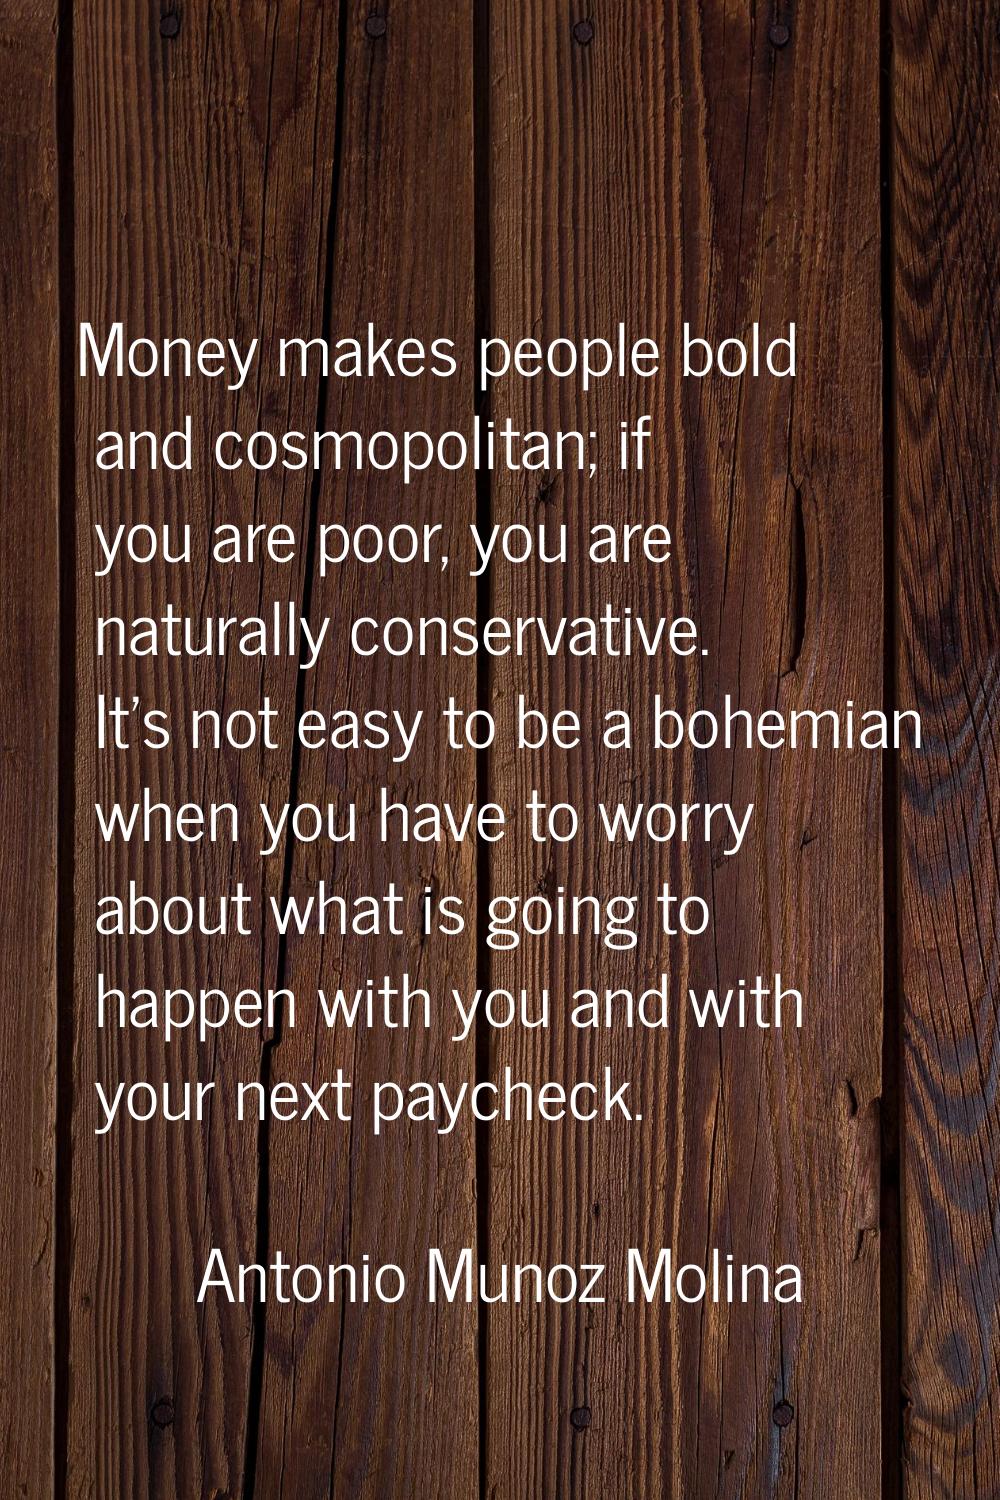 Money makes people bold and cosmopolitan; if you are poor, you are naturally conservative. It's not